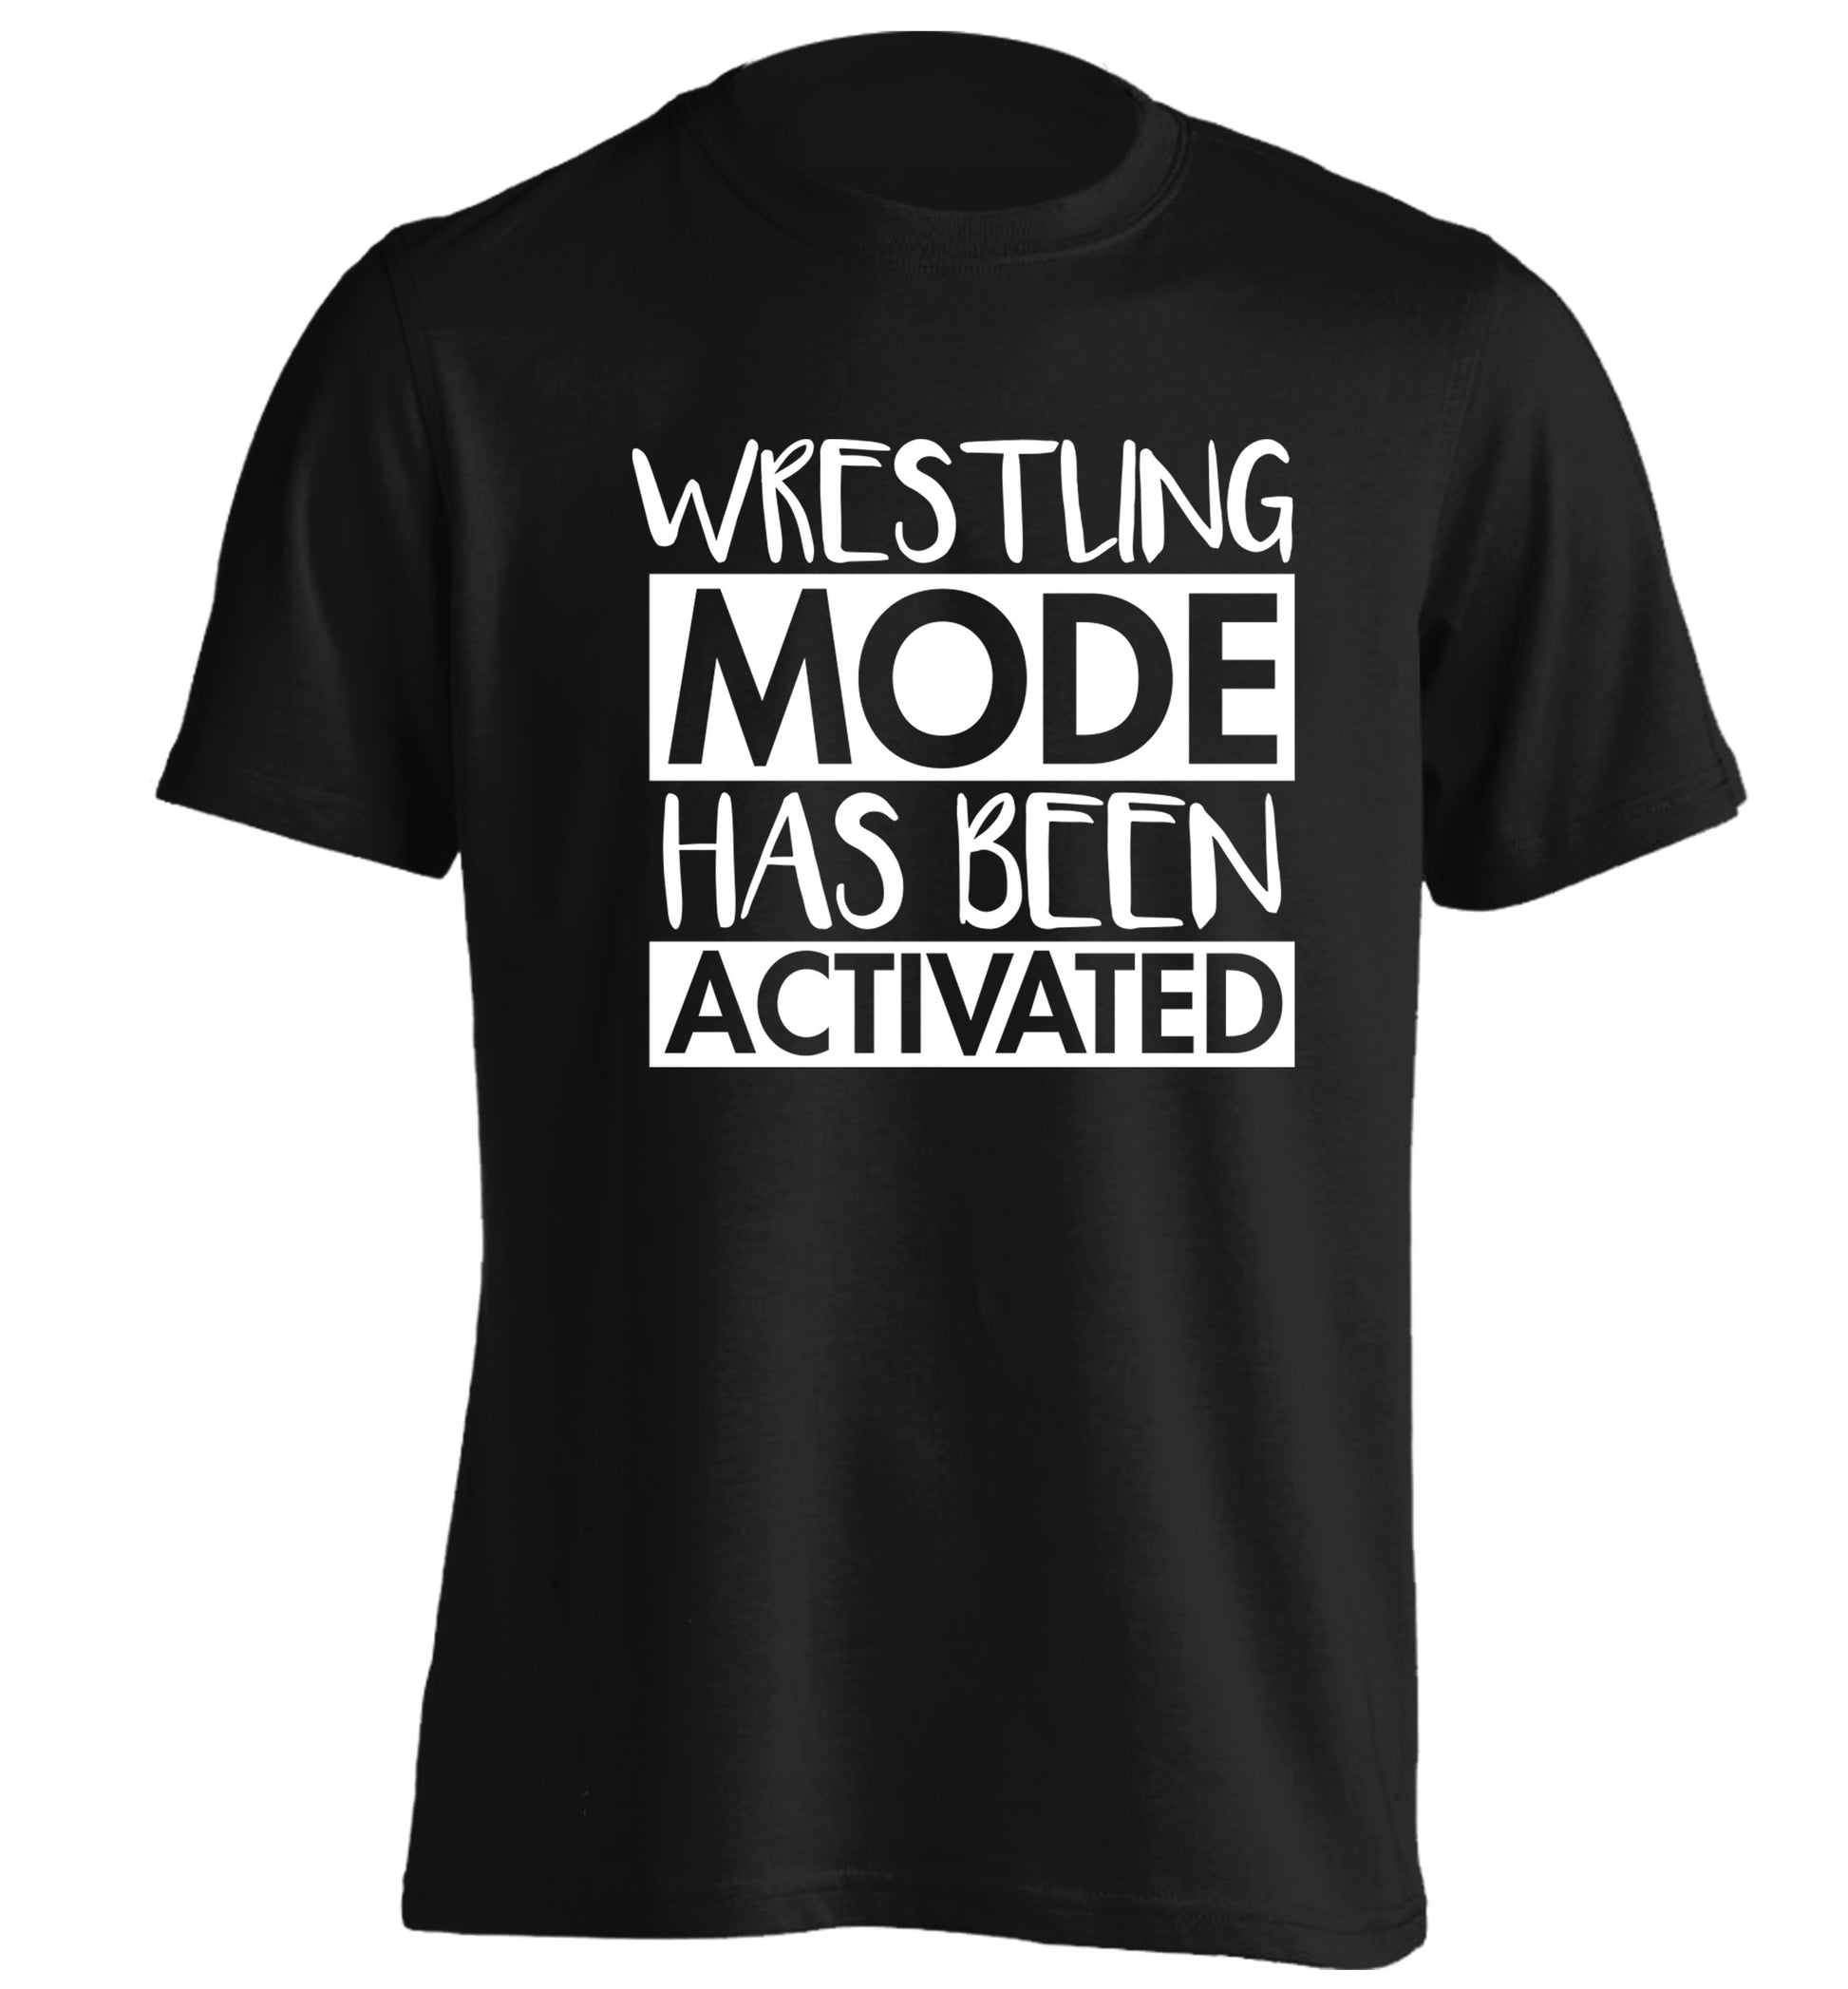 Wresting mode activated adults unisex black Tshirt 2XL